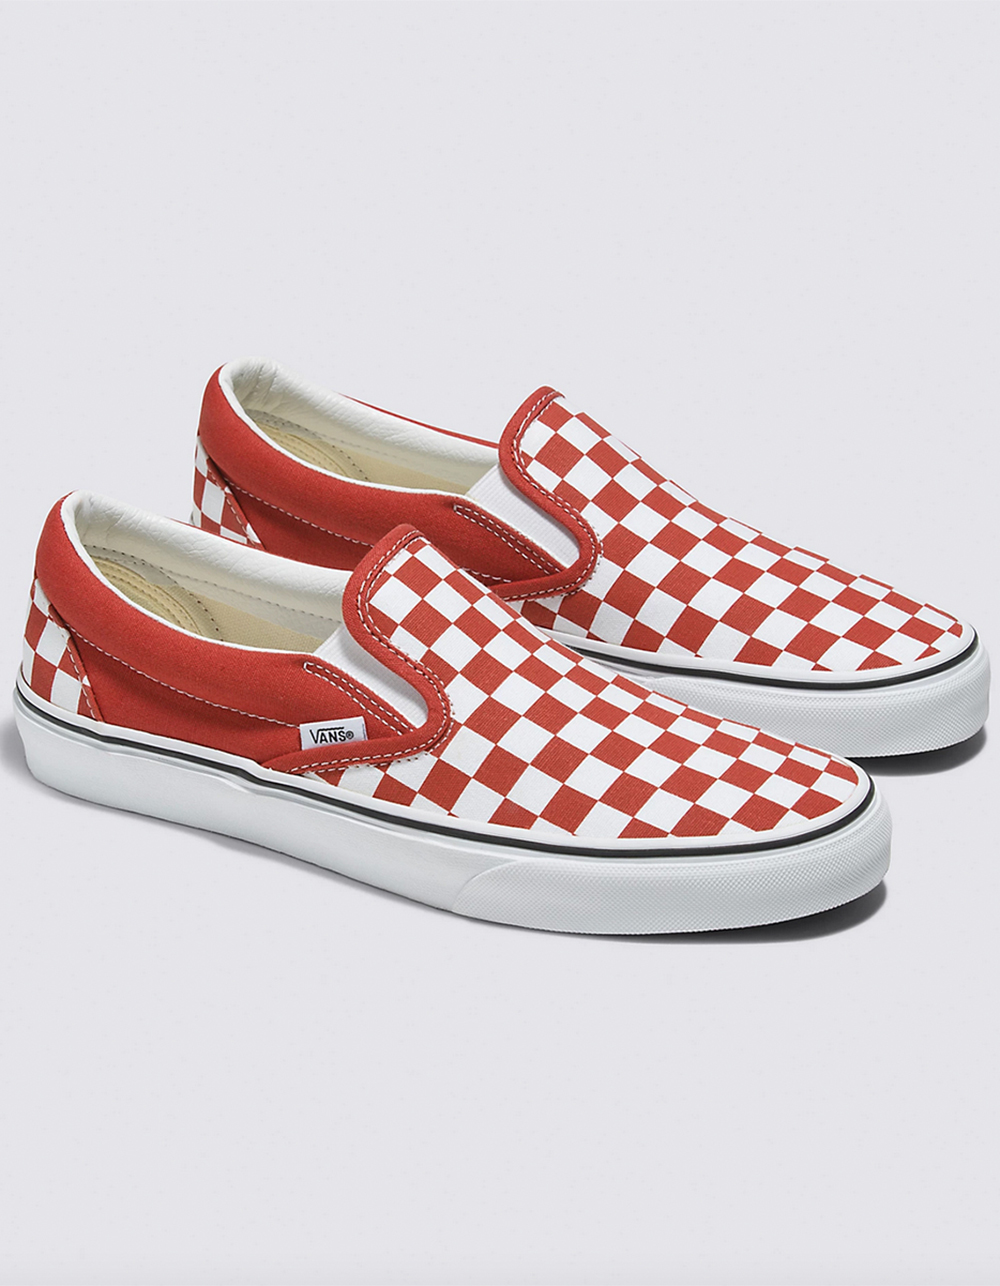 VANS Checkerboard Classic Slip-On Shoes - RUST | Tillys